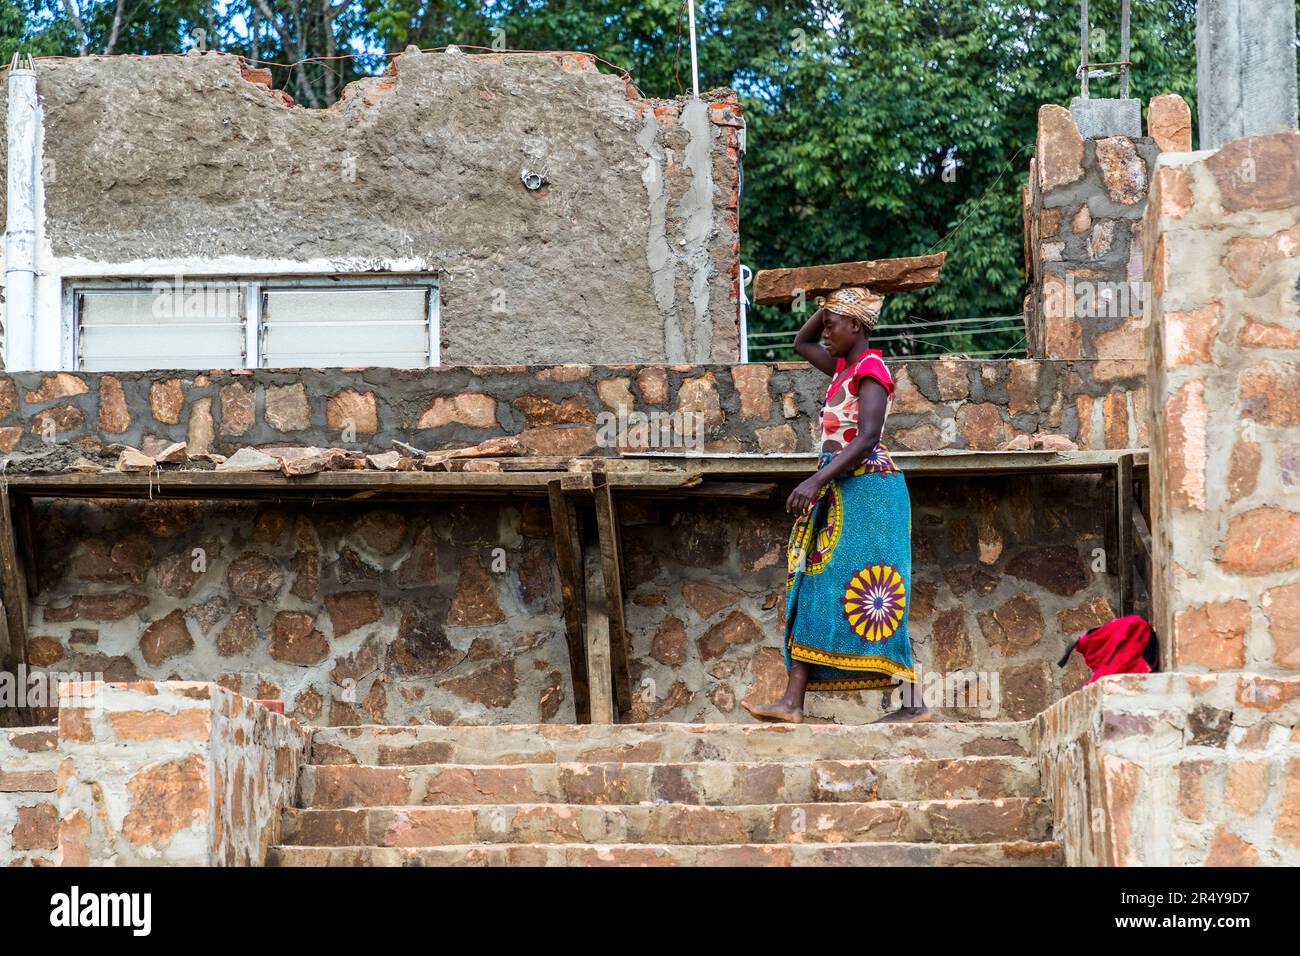 Construction work on a stone house near Lilongwe. Men and women work together on the construction site at Kumbali Country Lodge in Lilongwe, Malawi Stock Photo